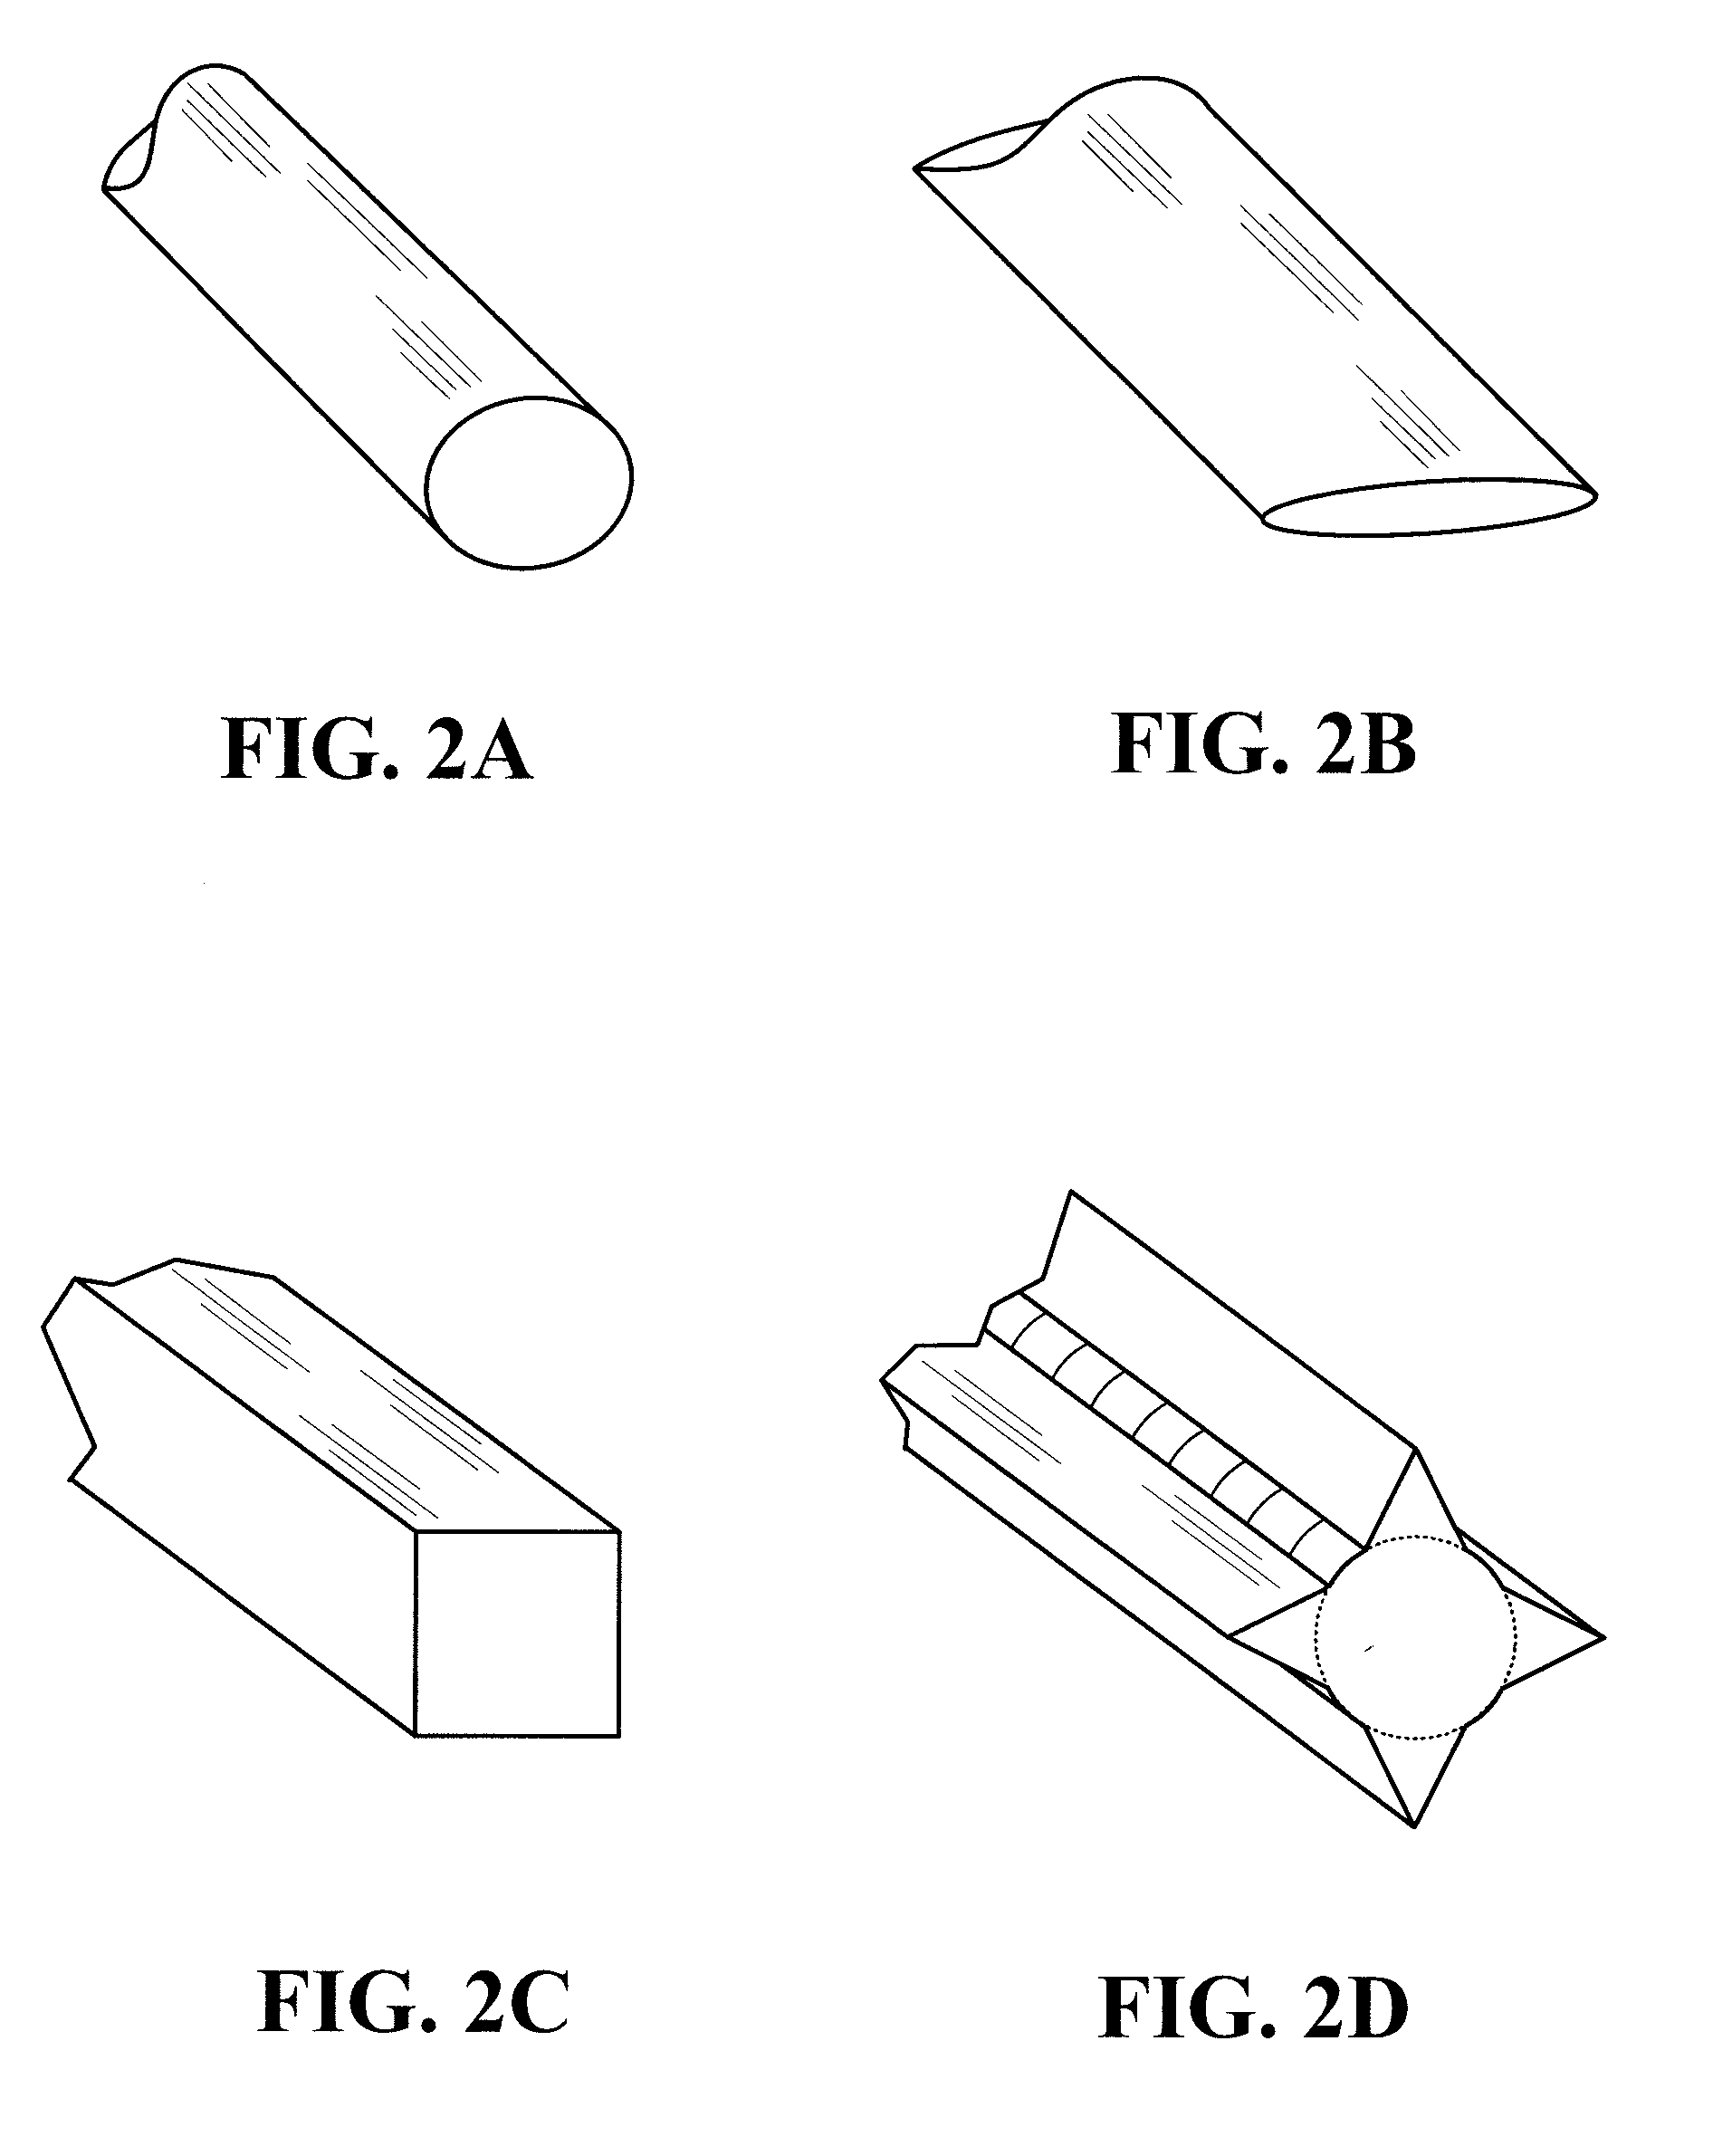 Method of Forming Barbs on a Suture